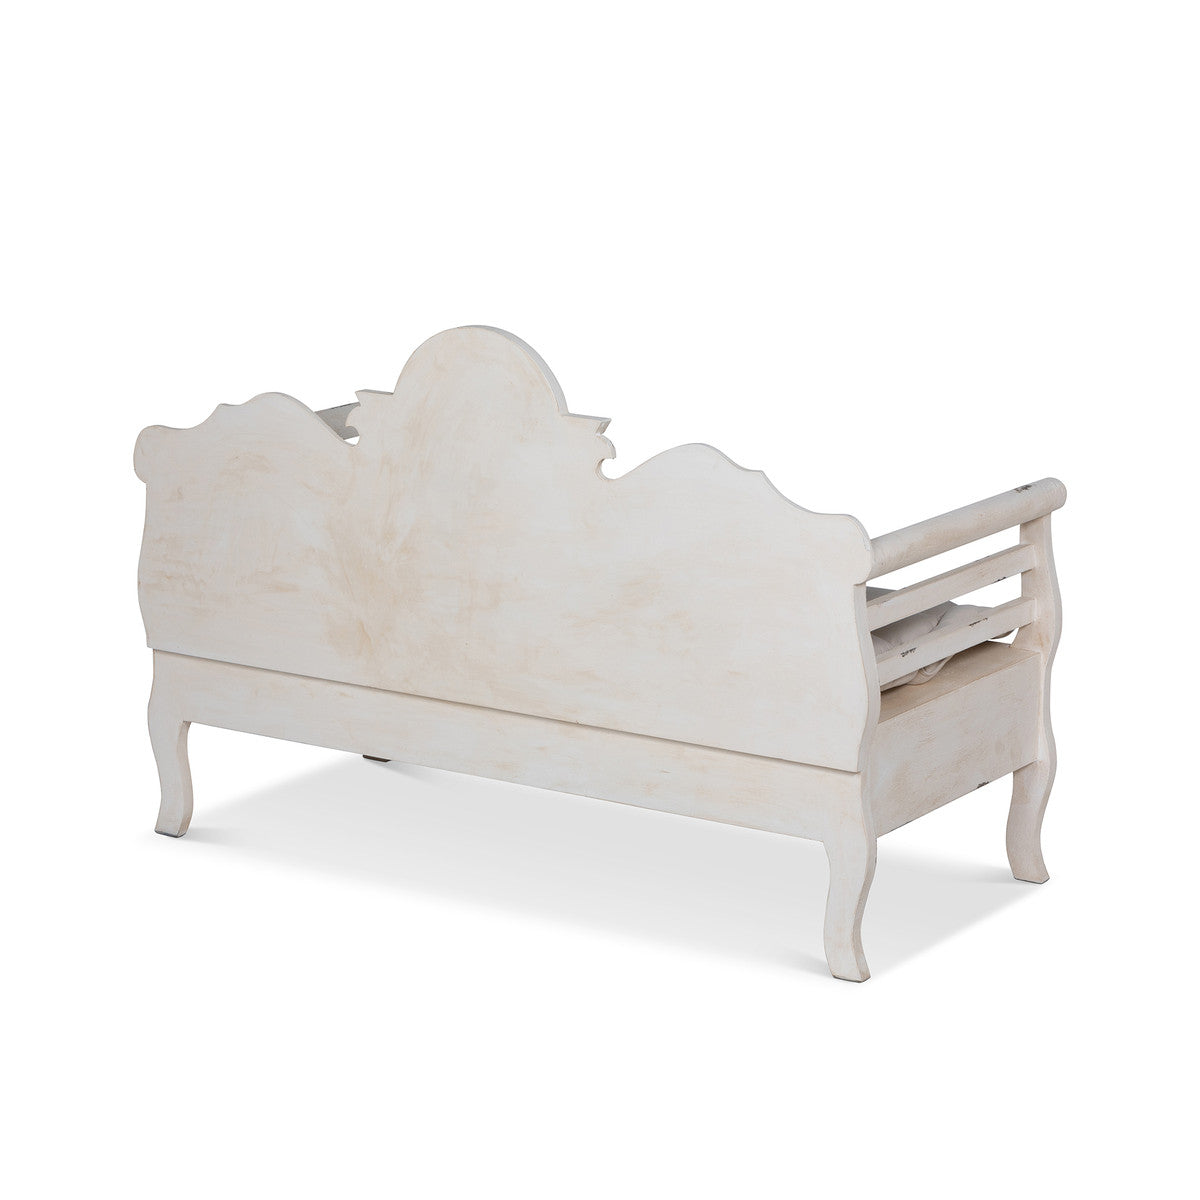 Lovecup Toulon White Wash Wooden Bench L172